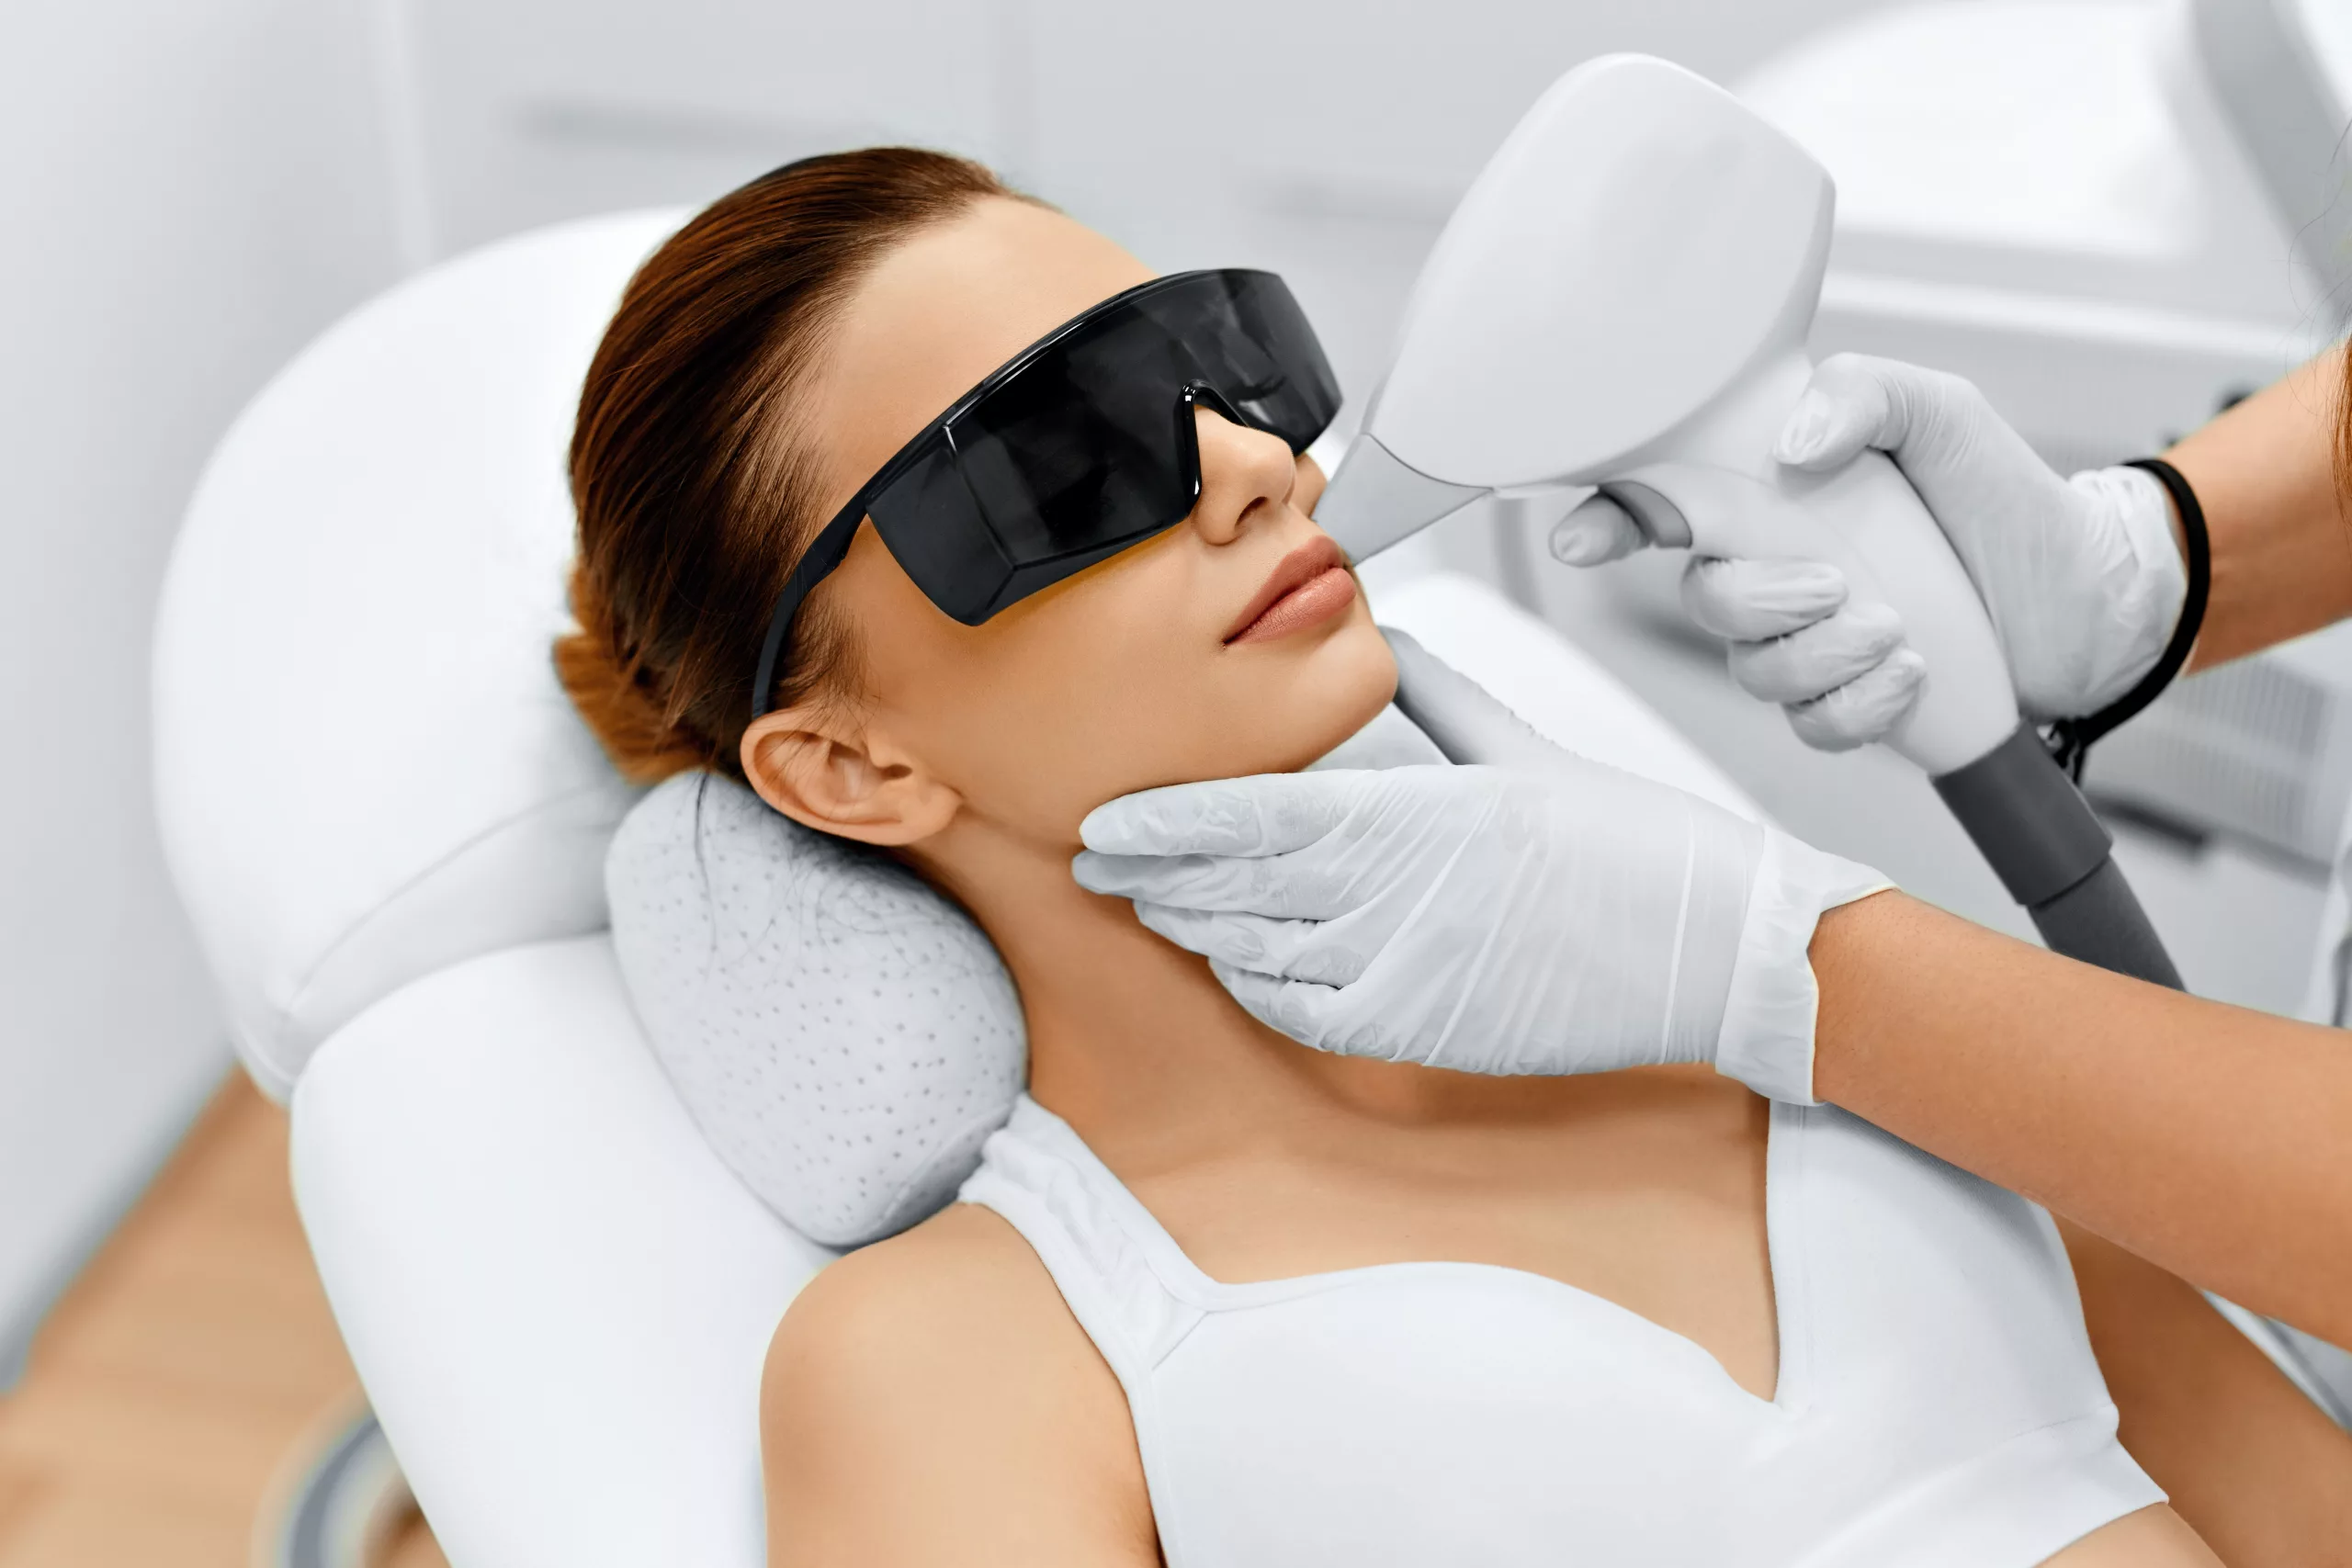 A Lady getting Laser Hair Removal | New U Women's Clinic & Aesthetics in Kennewick, WA